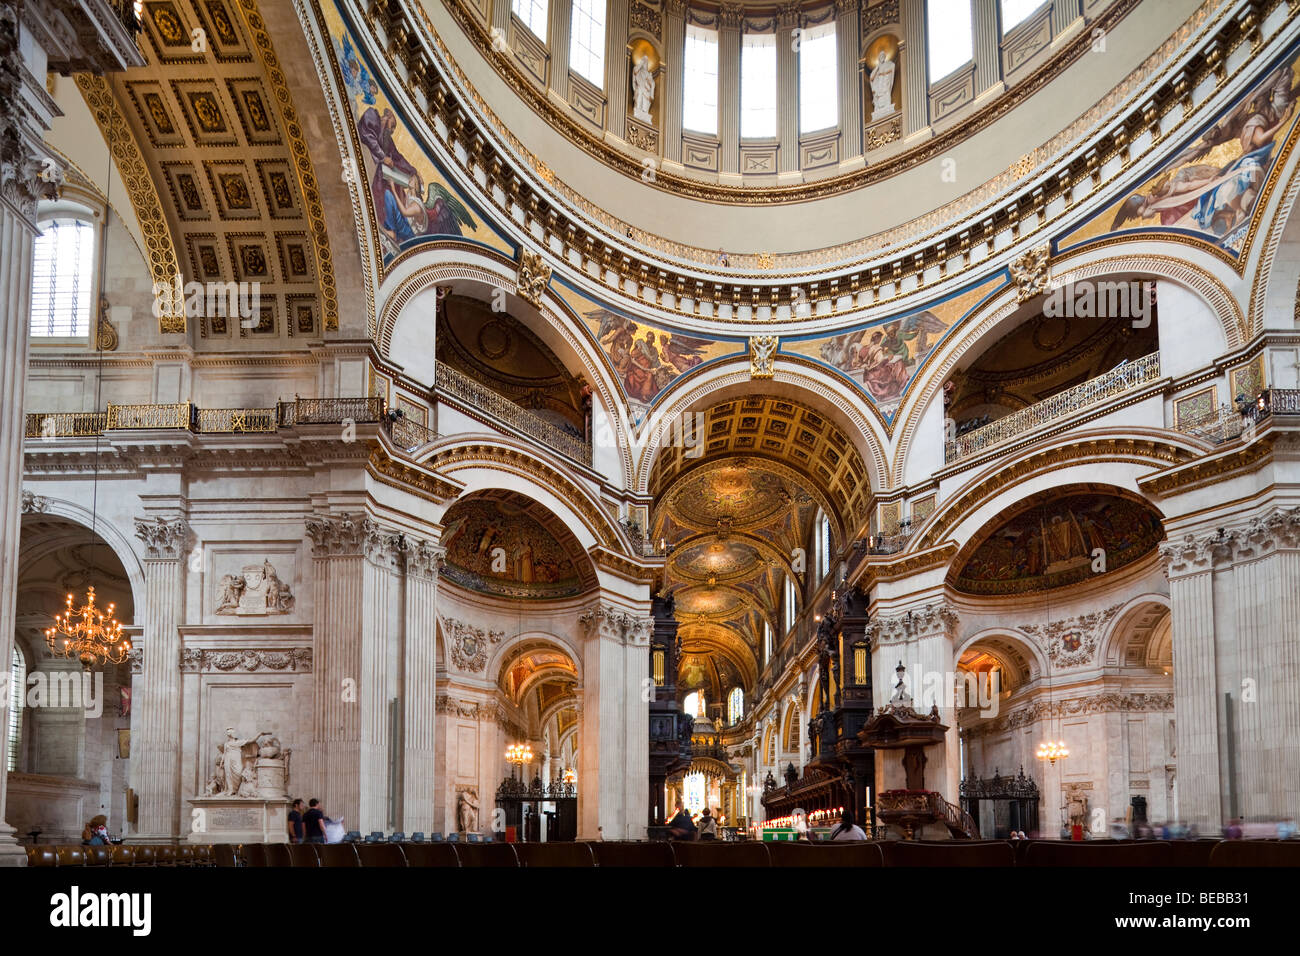 interior, St. Paul's cathedral, London, England, UK Stock Photo